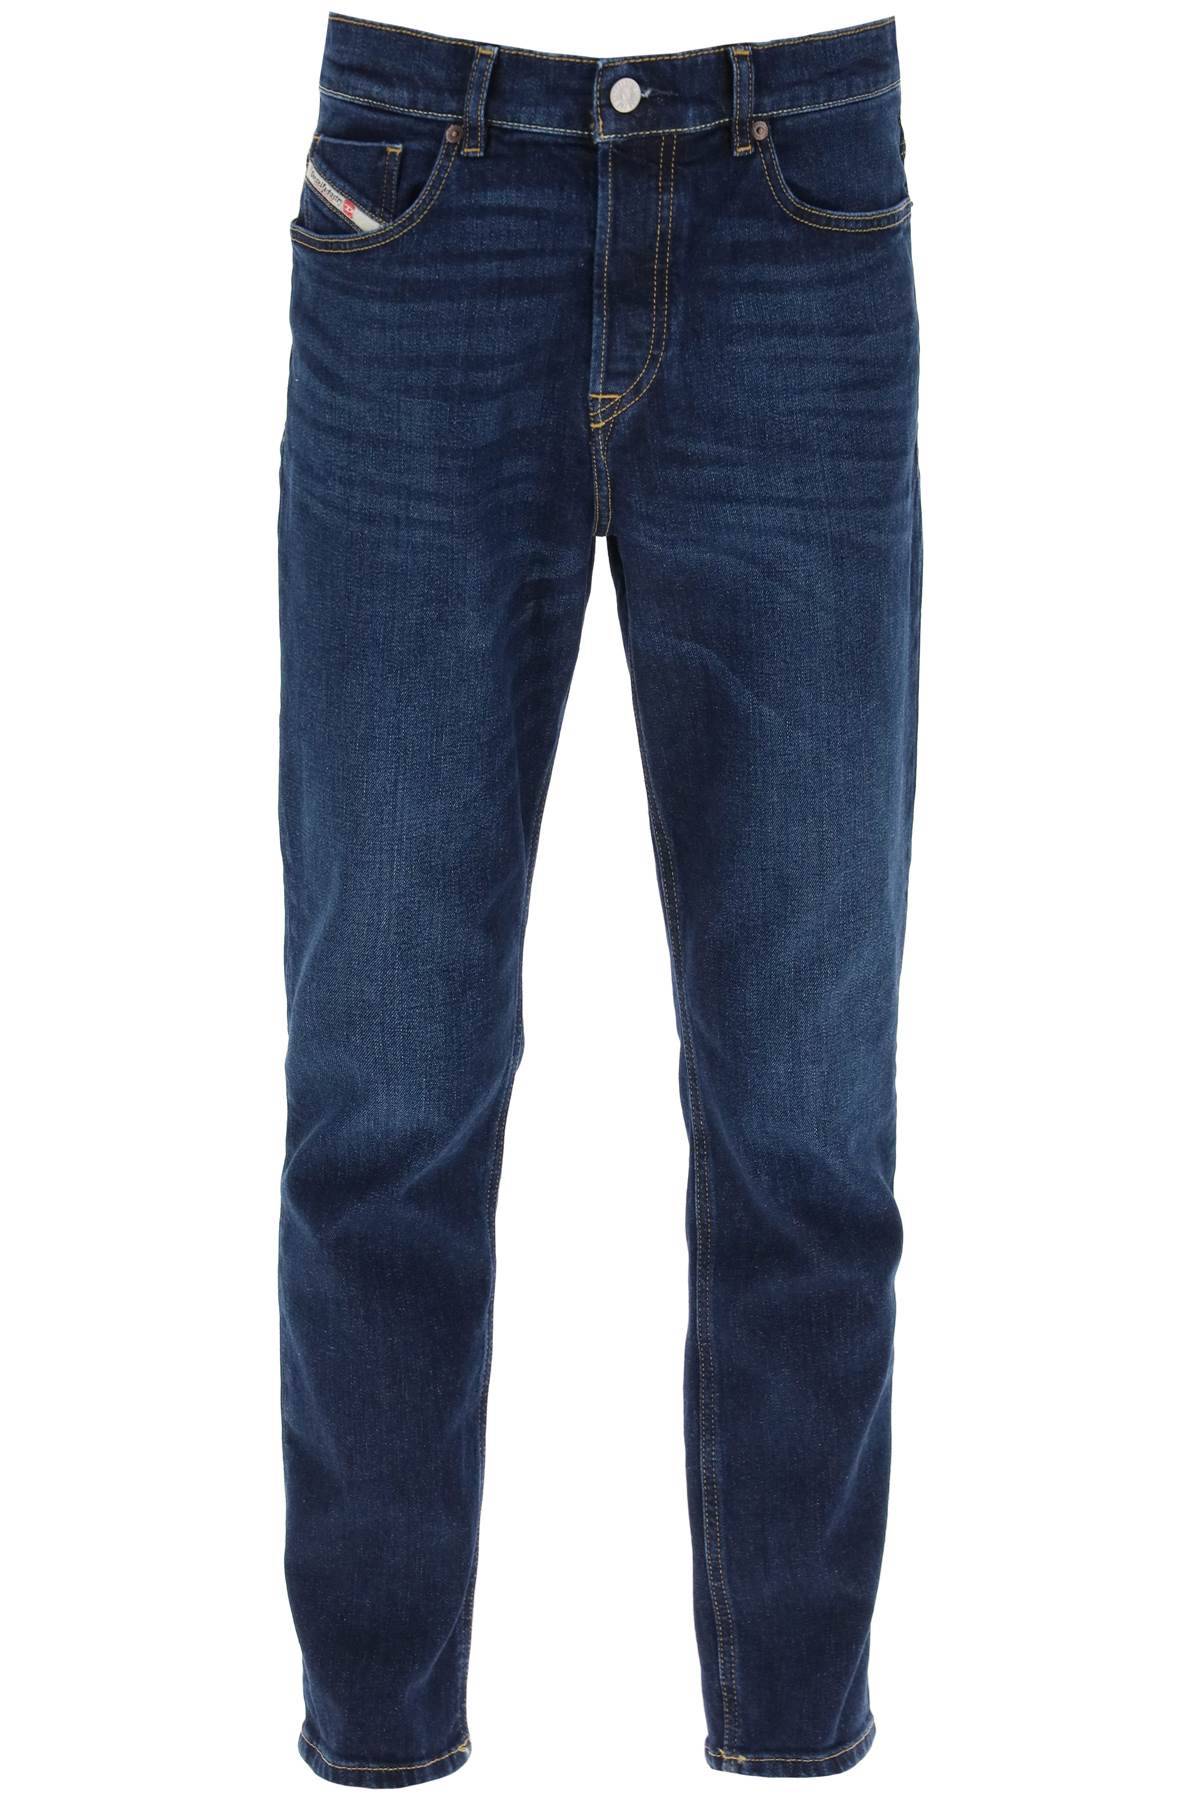 Diesel DIESEL 'd-fining' jeans with tapered leg